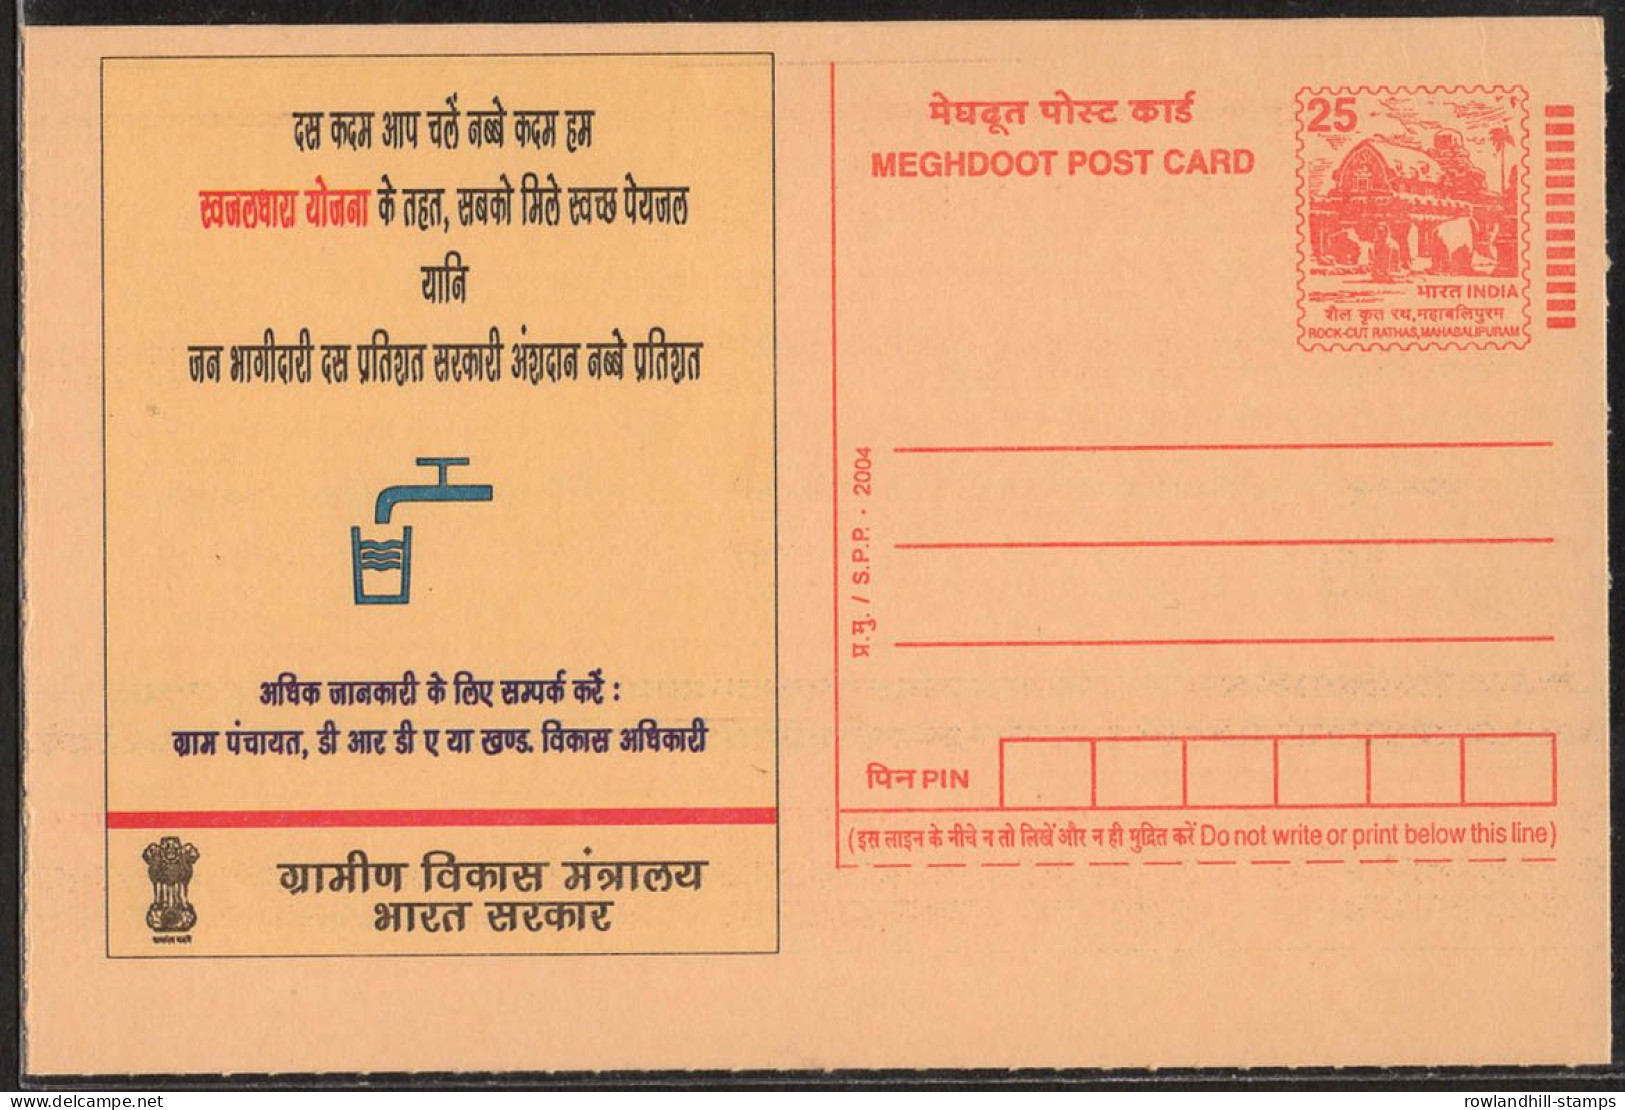 India, 2004, Rural Development DRINKING WATER, Meghdoot Postcard, Conservation, Stationery, Environment, Nature, B23 - Agua